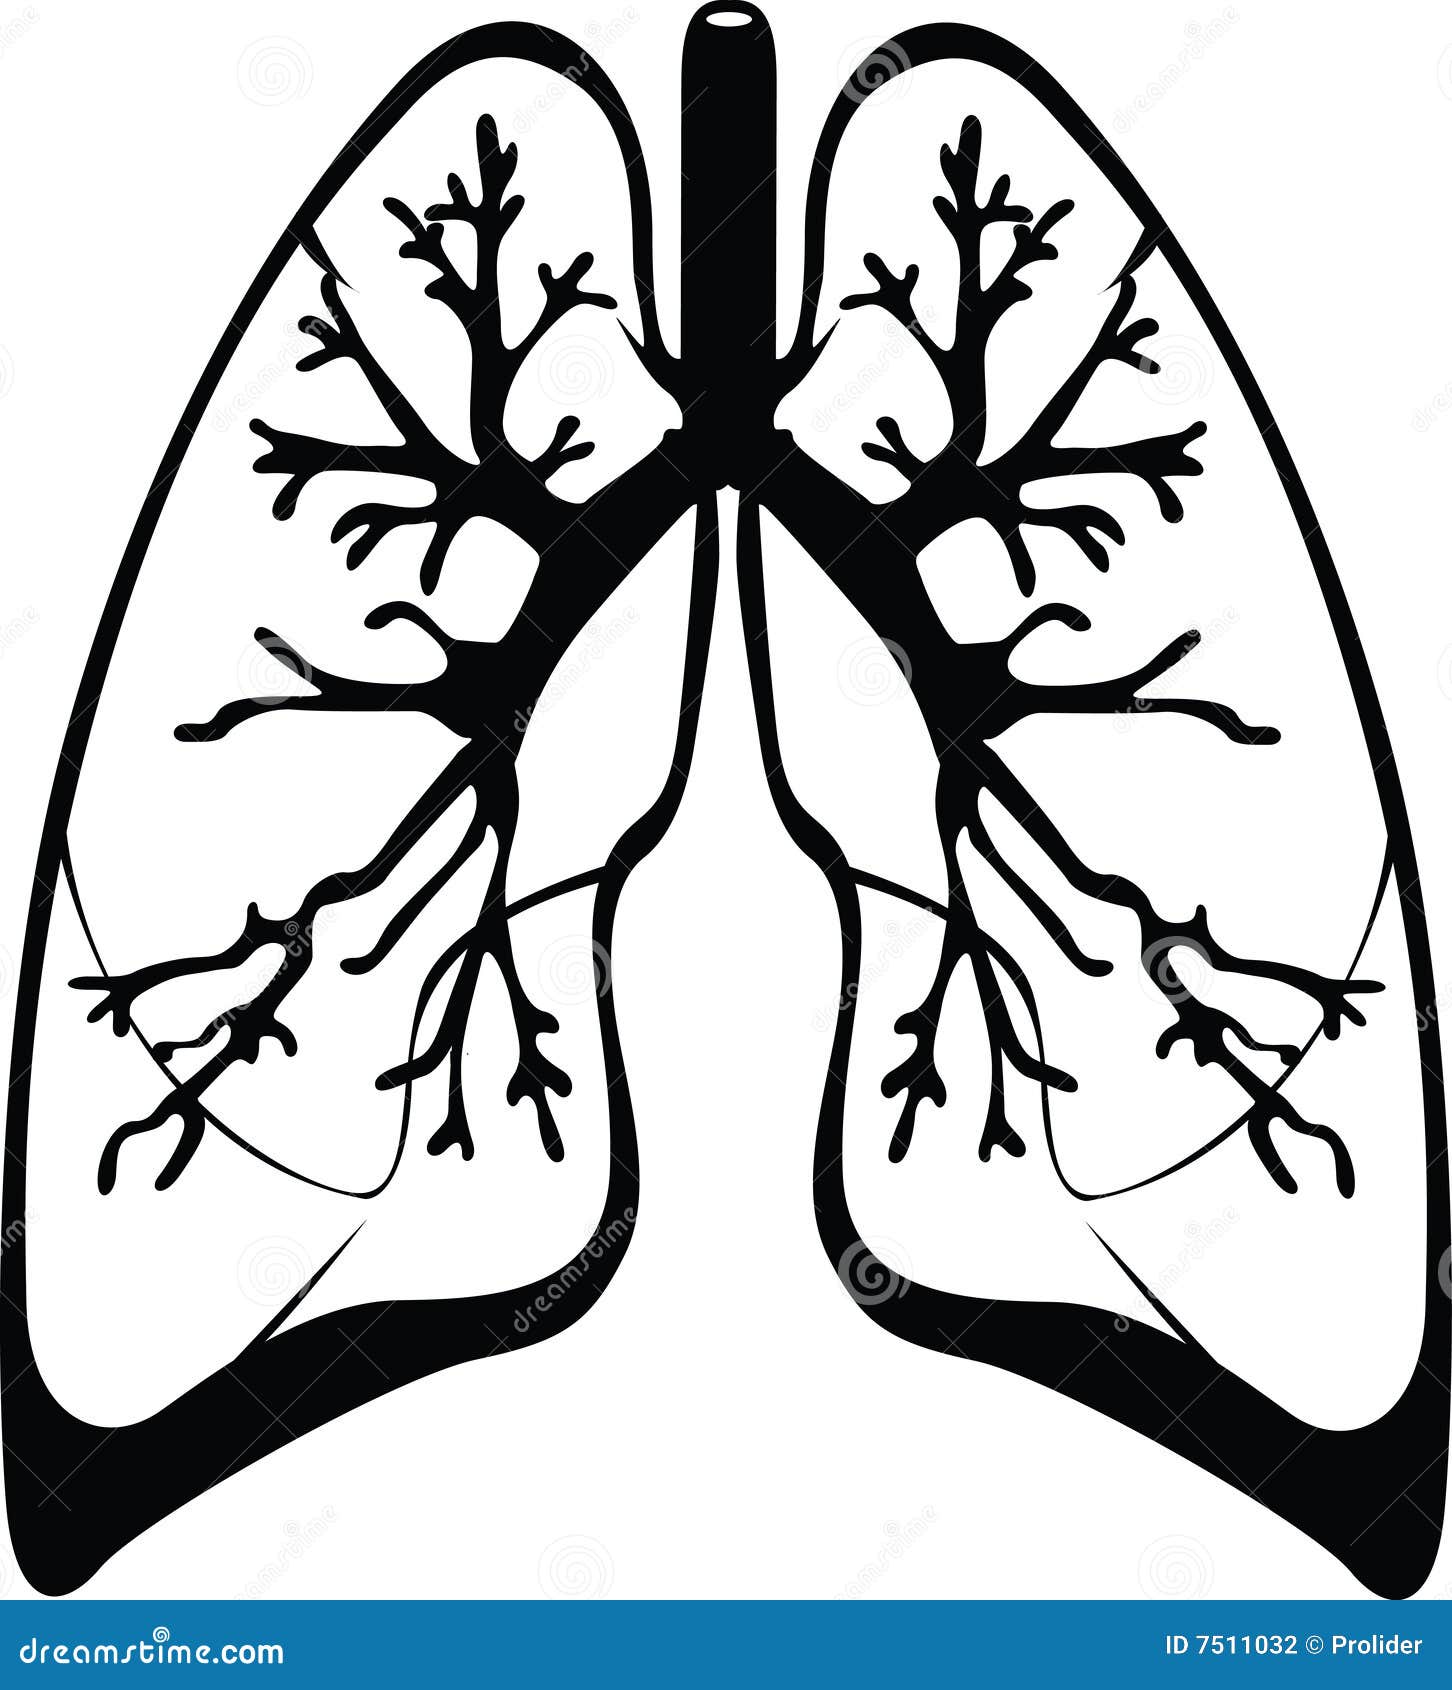 clipart human lungs - photo #46